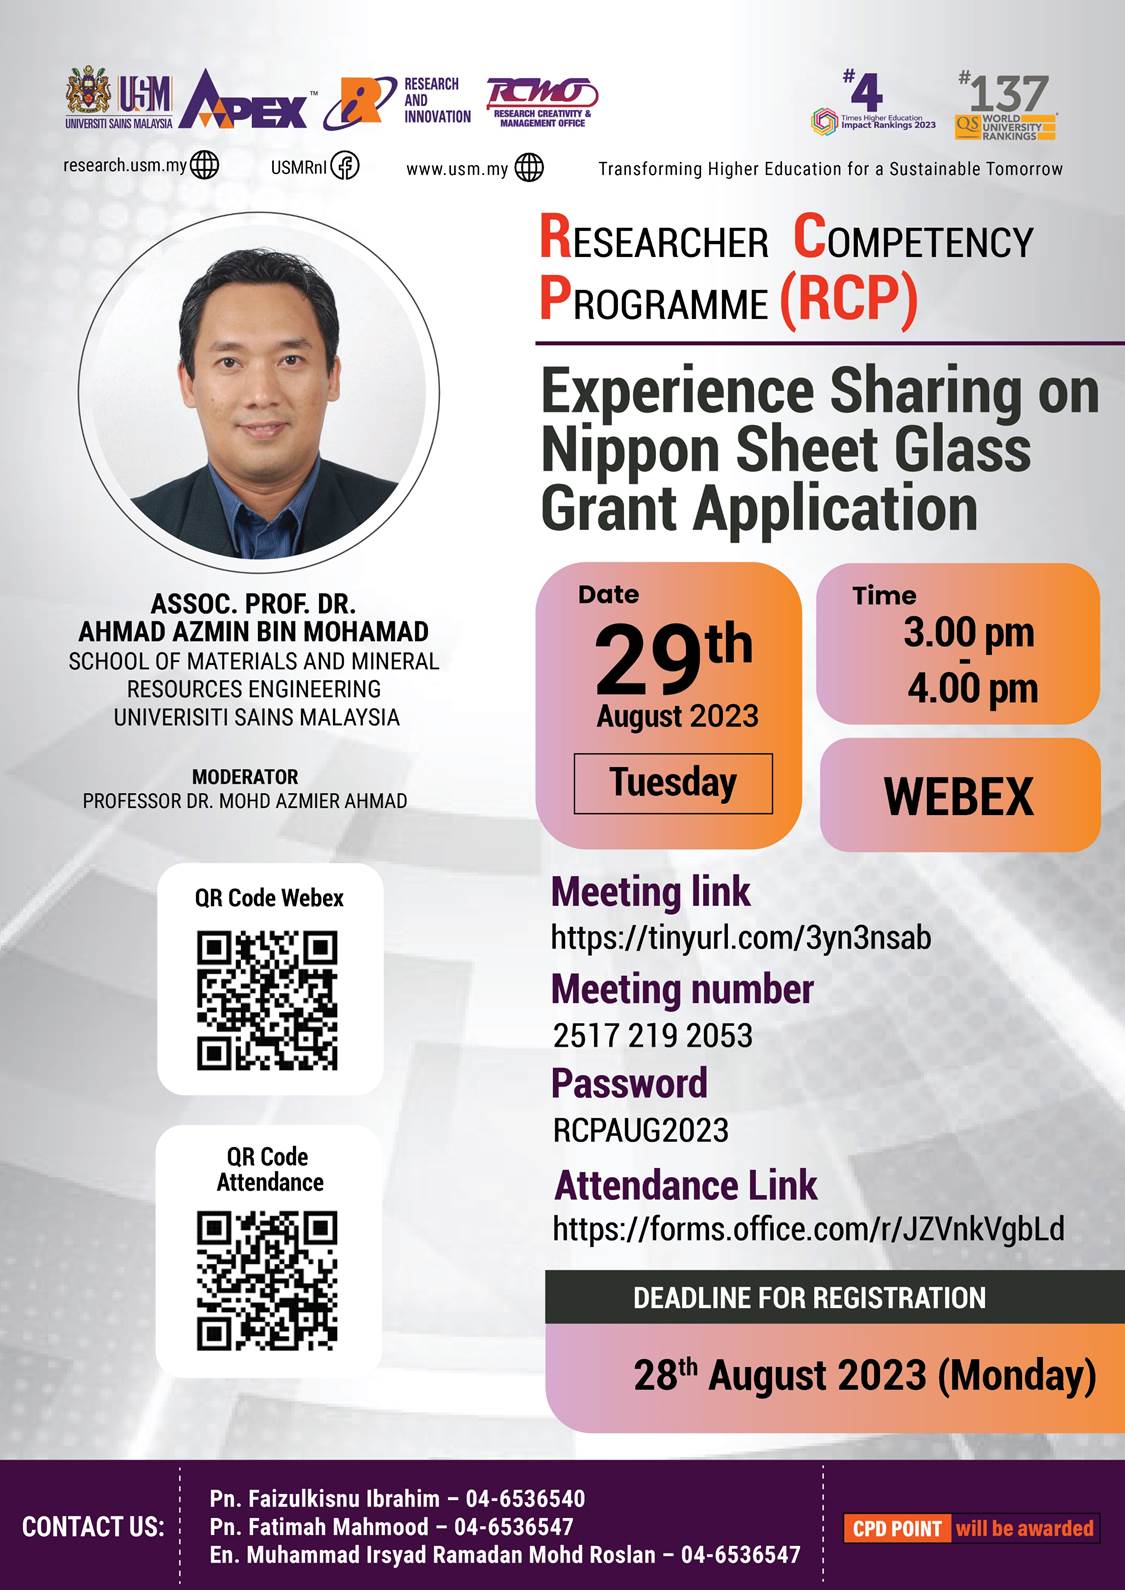 eposter RCP EXPERIENCE SHARING ON NIPPON SHEET GLASS GRANT APPLICATION 290823